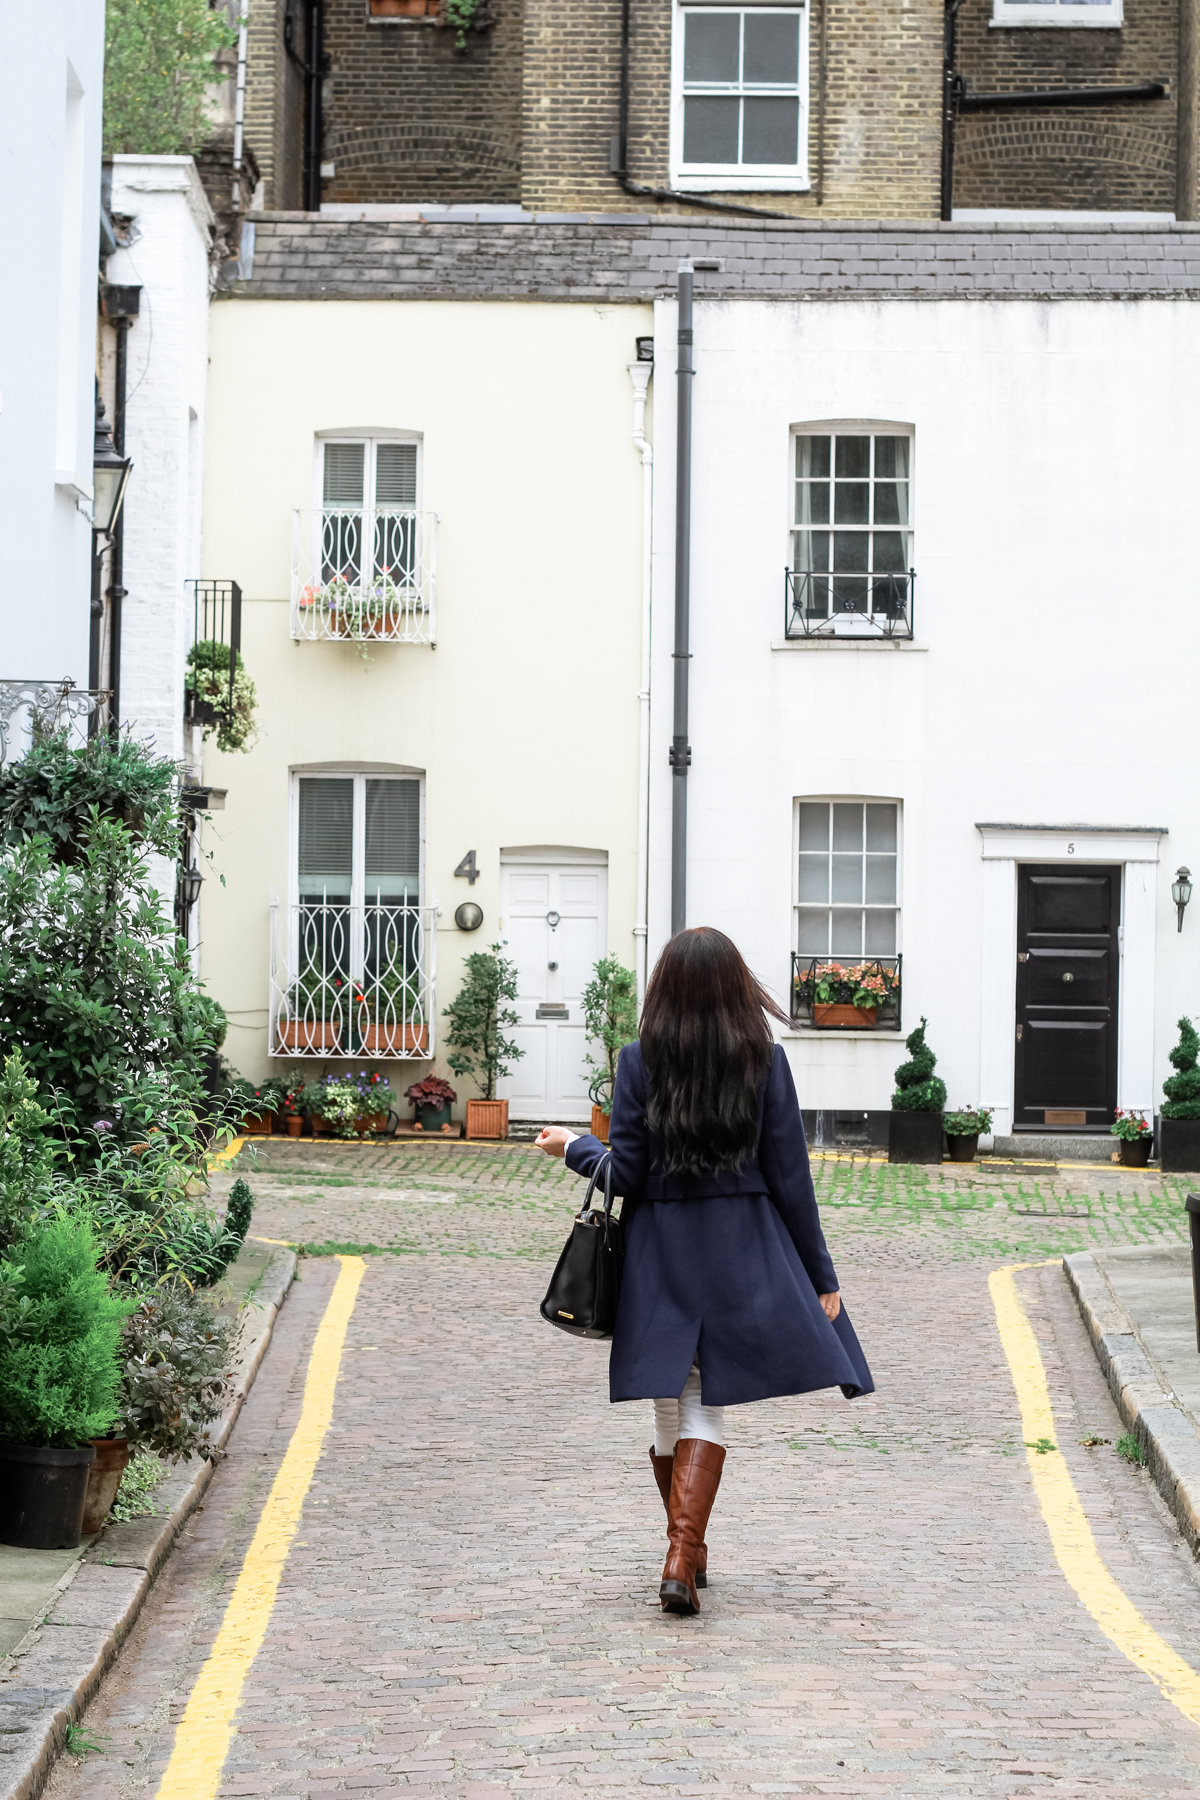 Solo in London: The Best Things to Do in London Solo